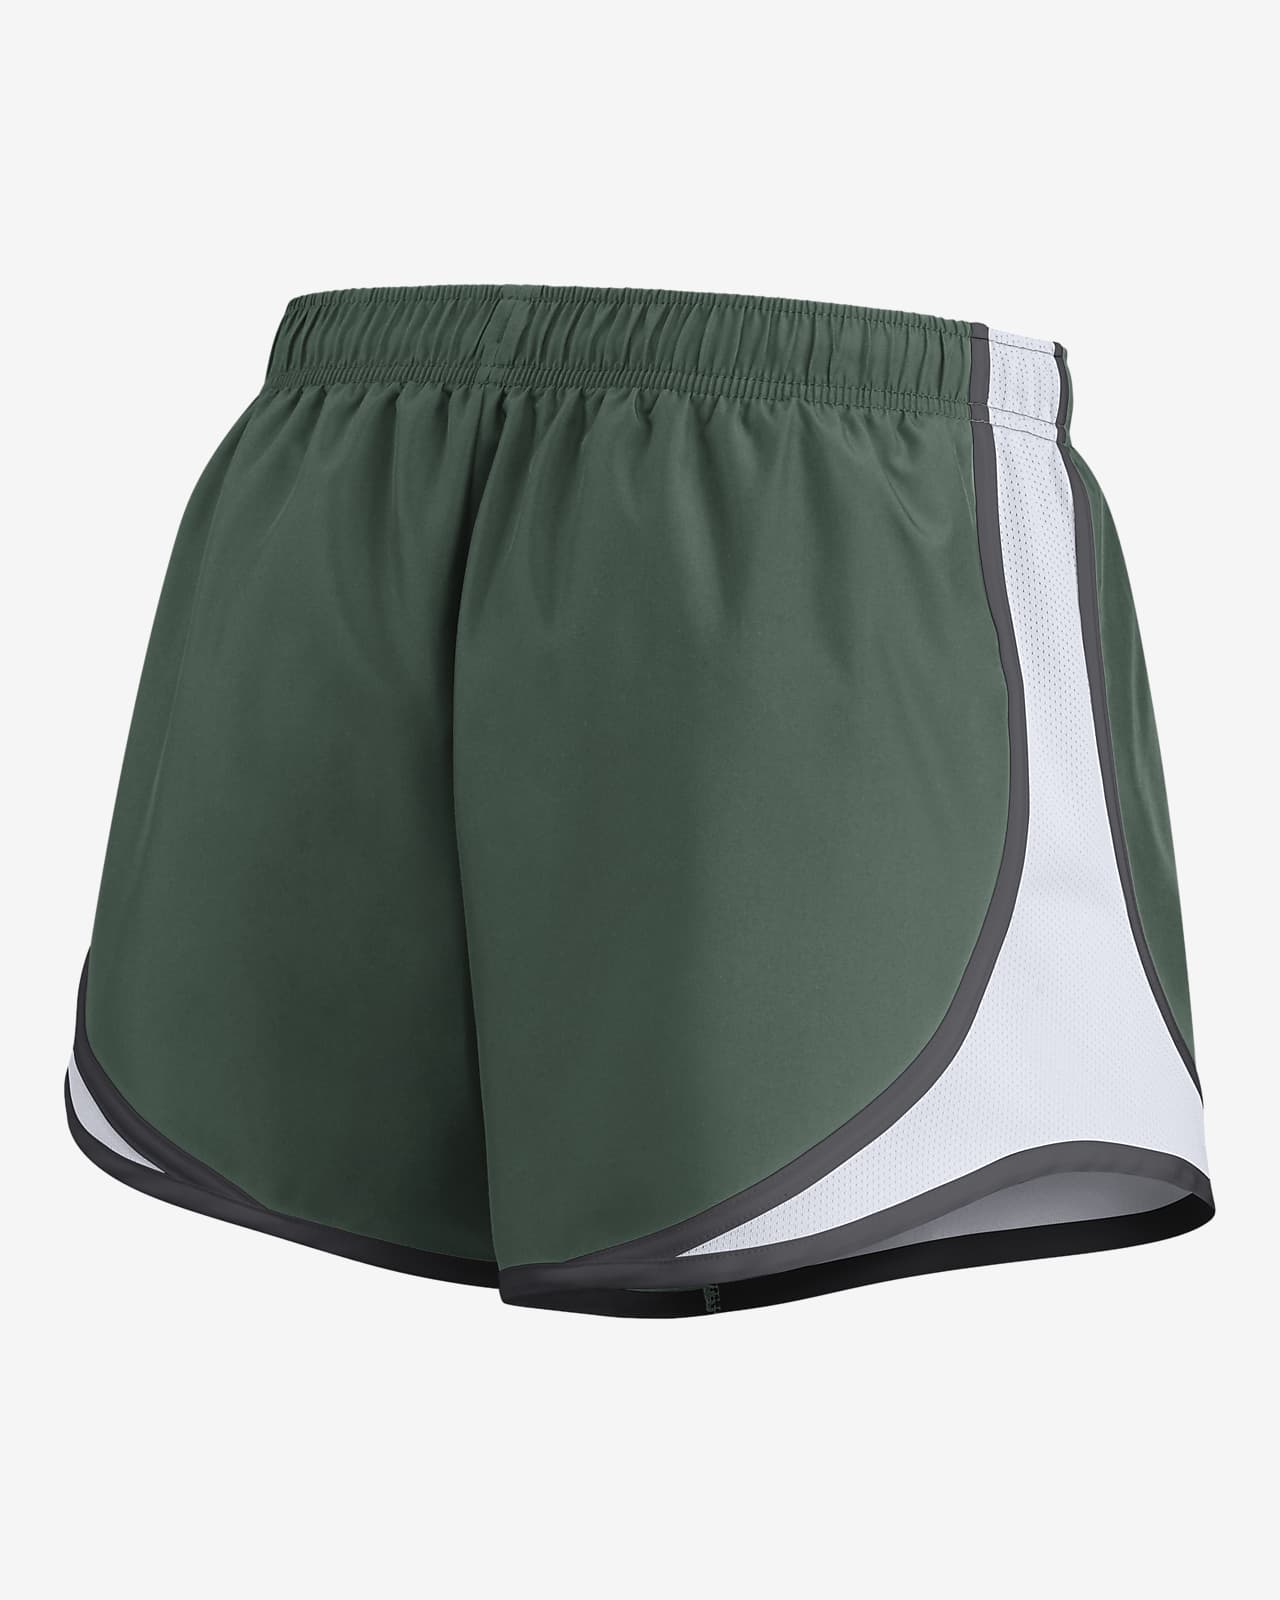 Nike Tempo 3 Dry-Fit Running Workout Yoga Shorts Green Olive